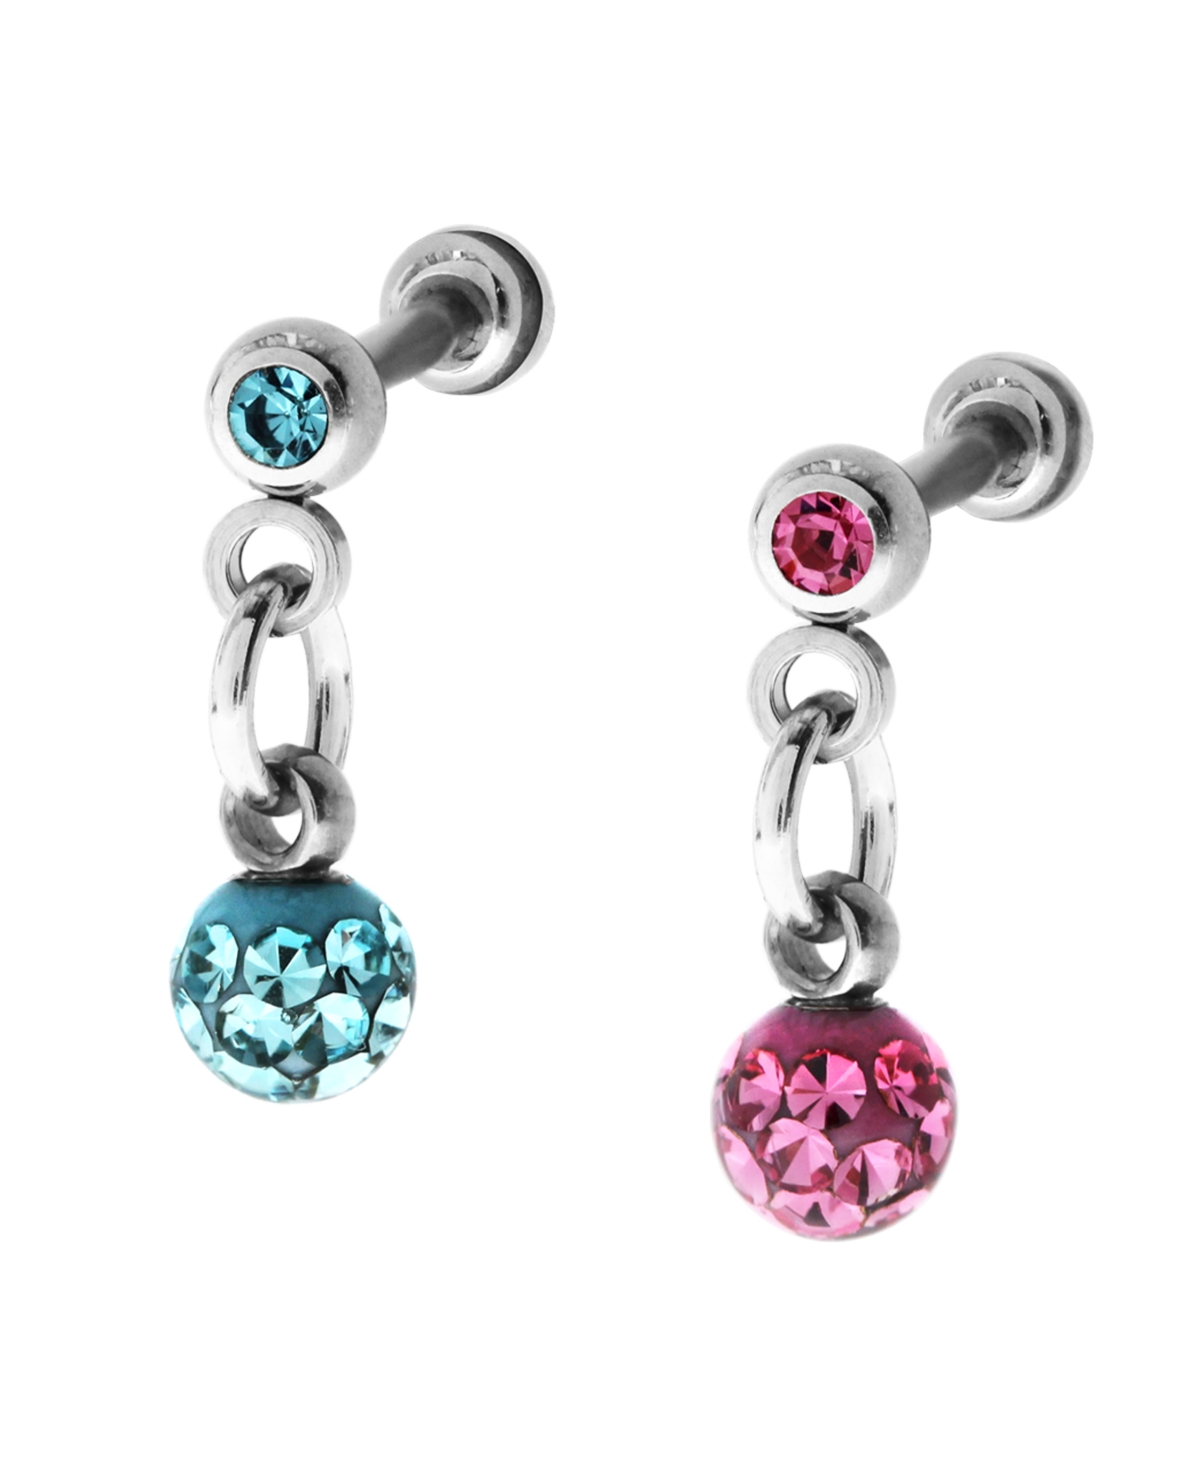 Bodifine Stainless Steel Set of 2 Crystal and Resin Tragus - Asstd